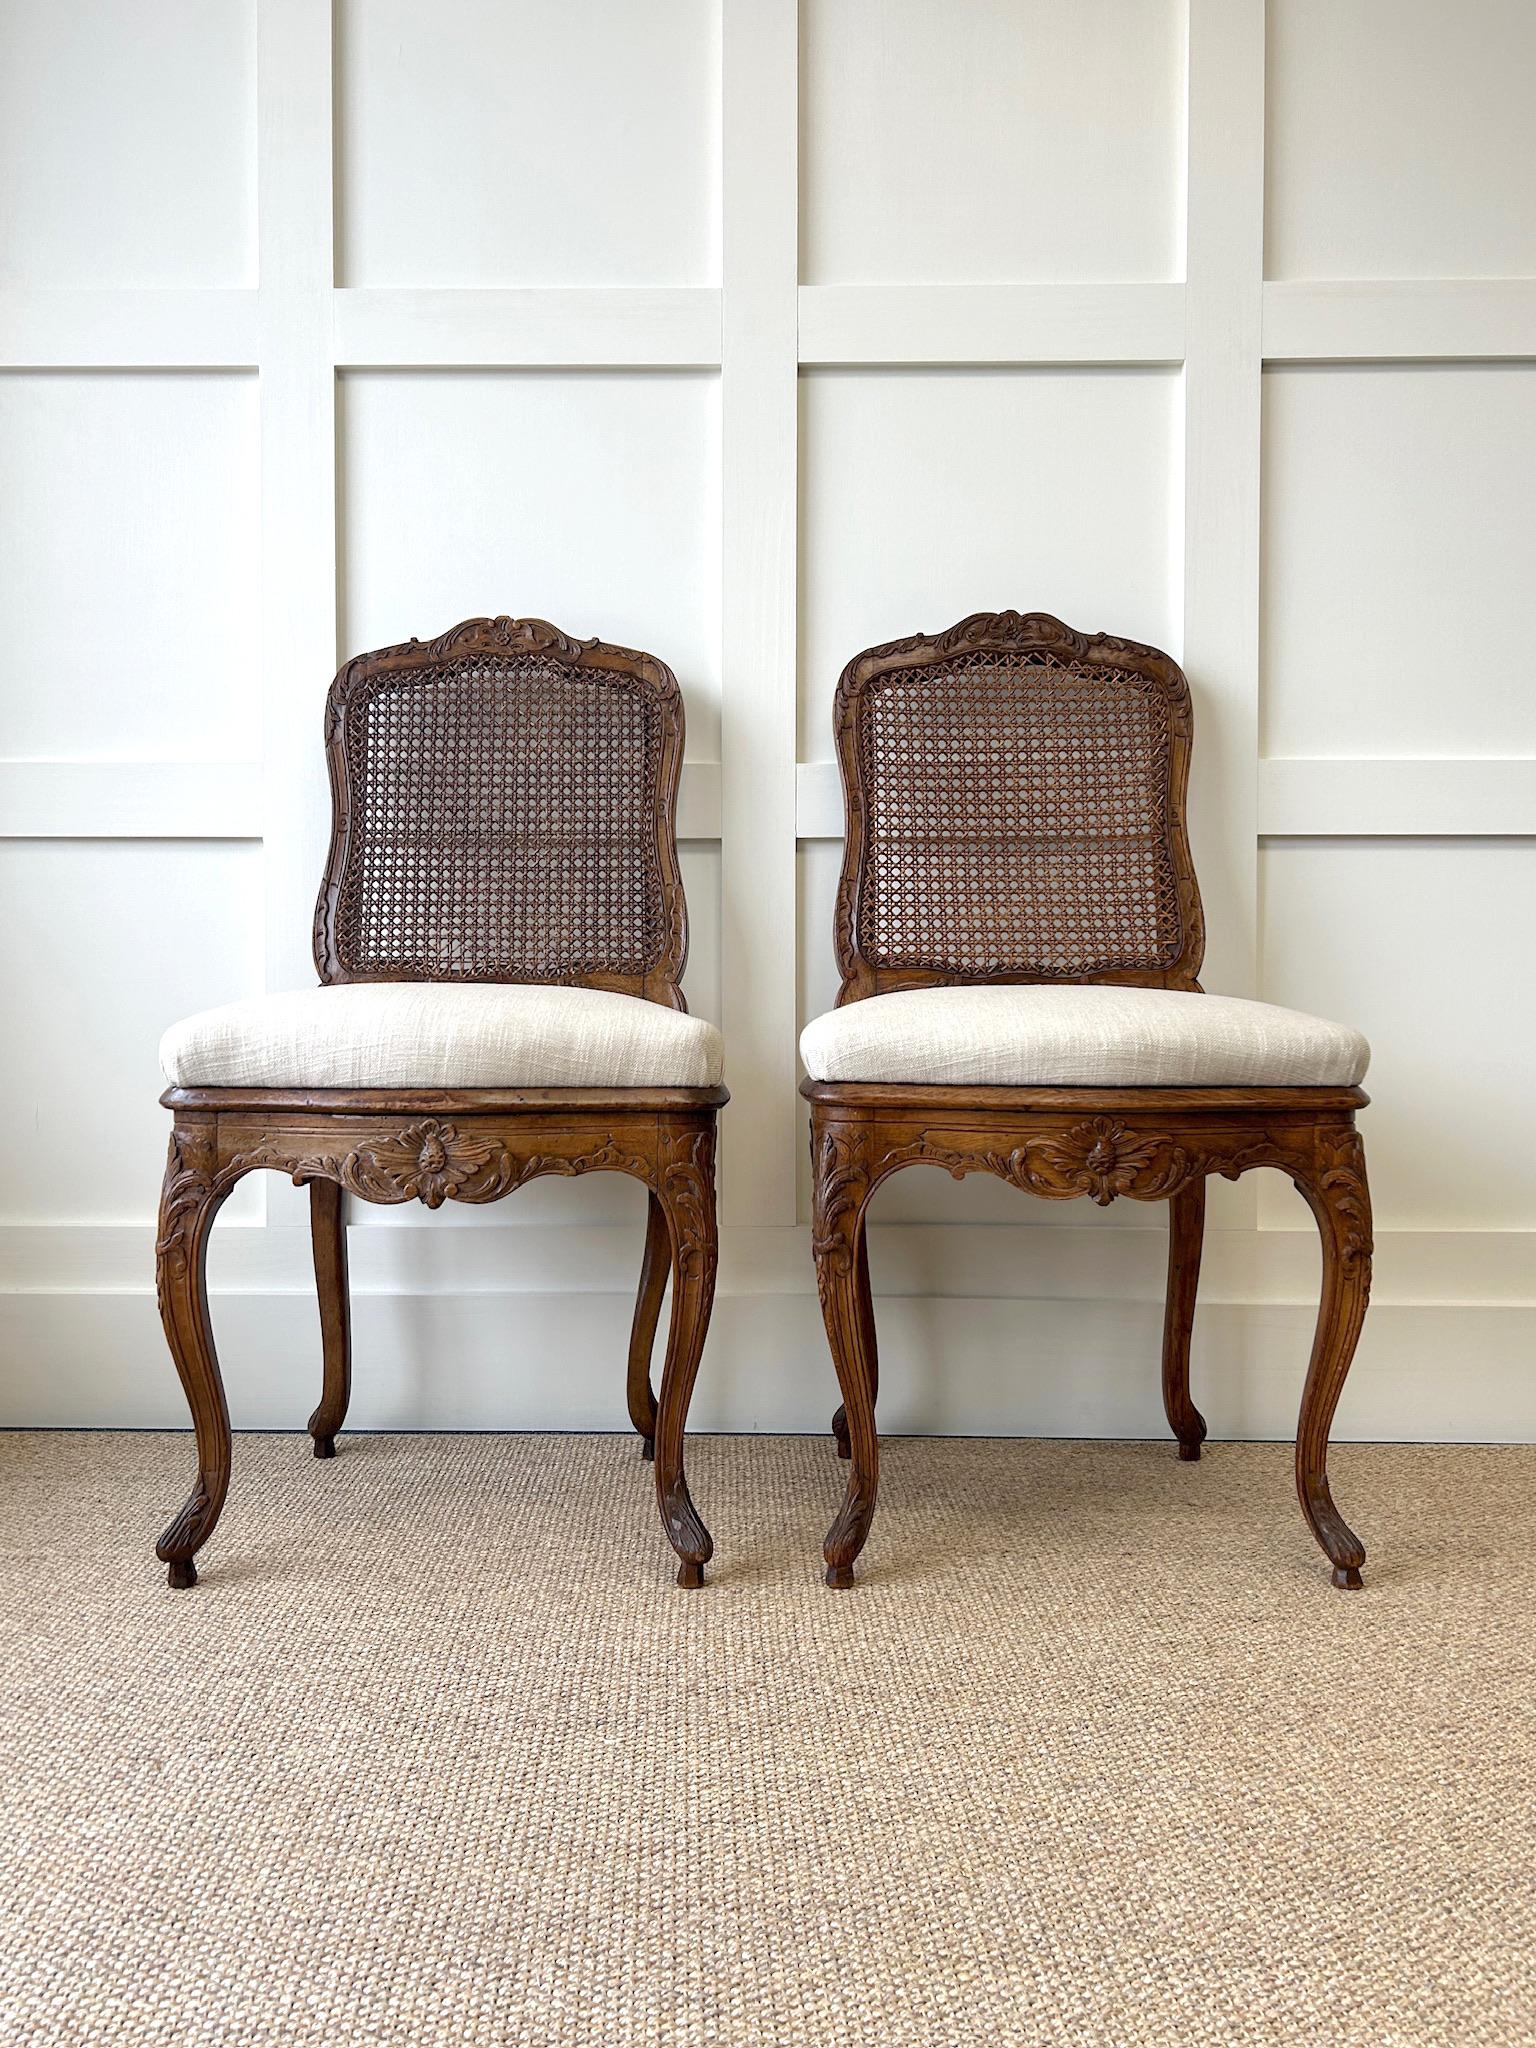 French Provincial A Lovely Pair of Early 19th Century French Salon Chairs For Sale